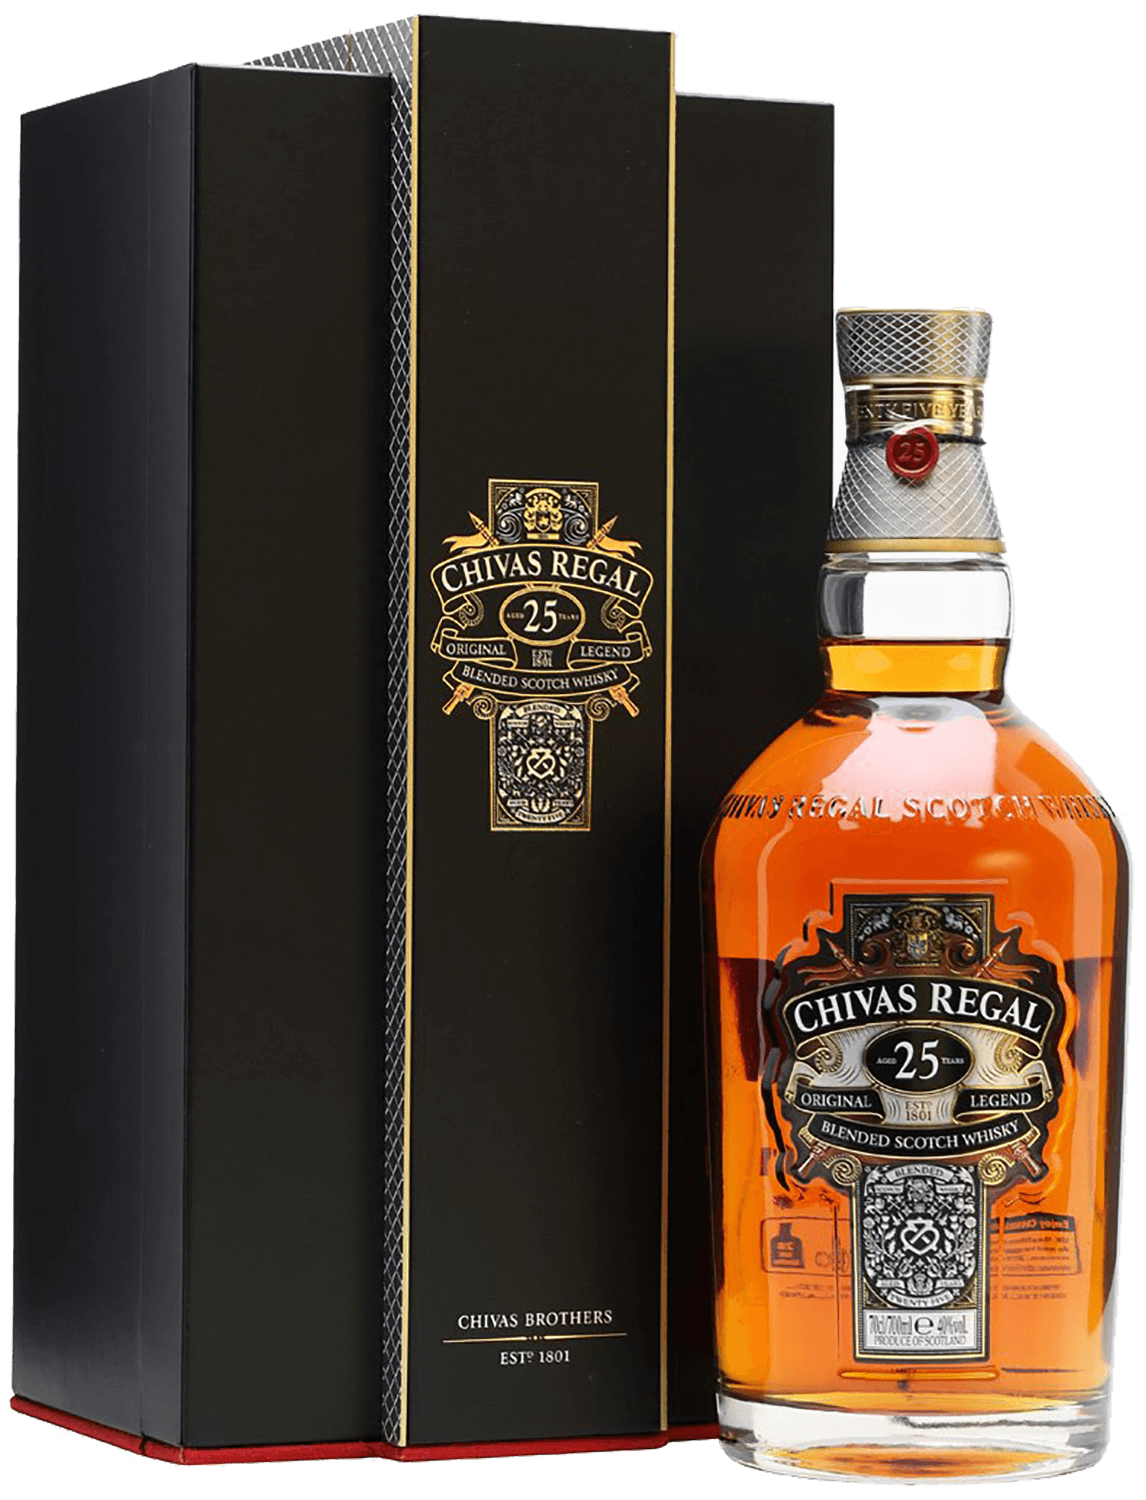 Chivas Regal 25 y.o. blended scotch whisky (gift box) chivas regal blended scotch whisky 25 y o gift box